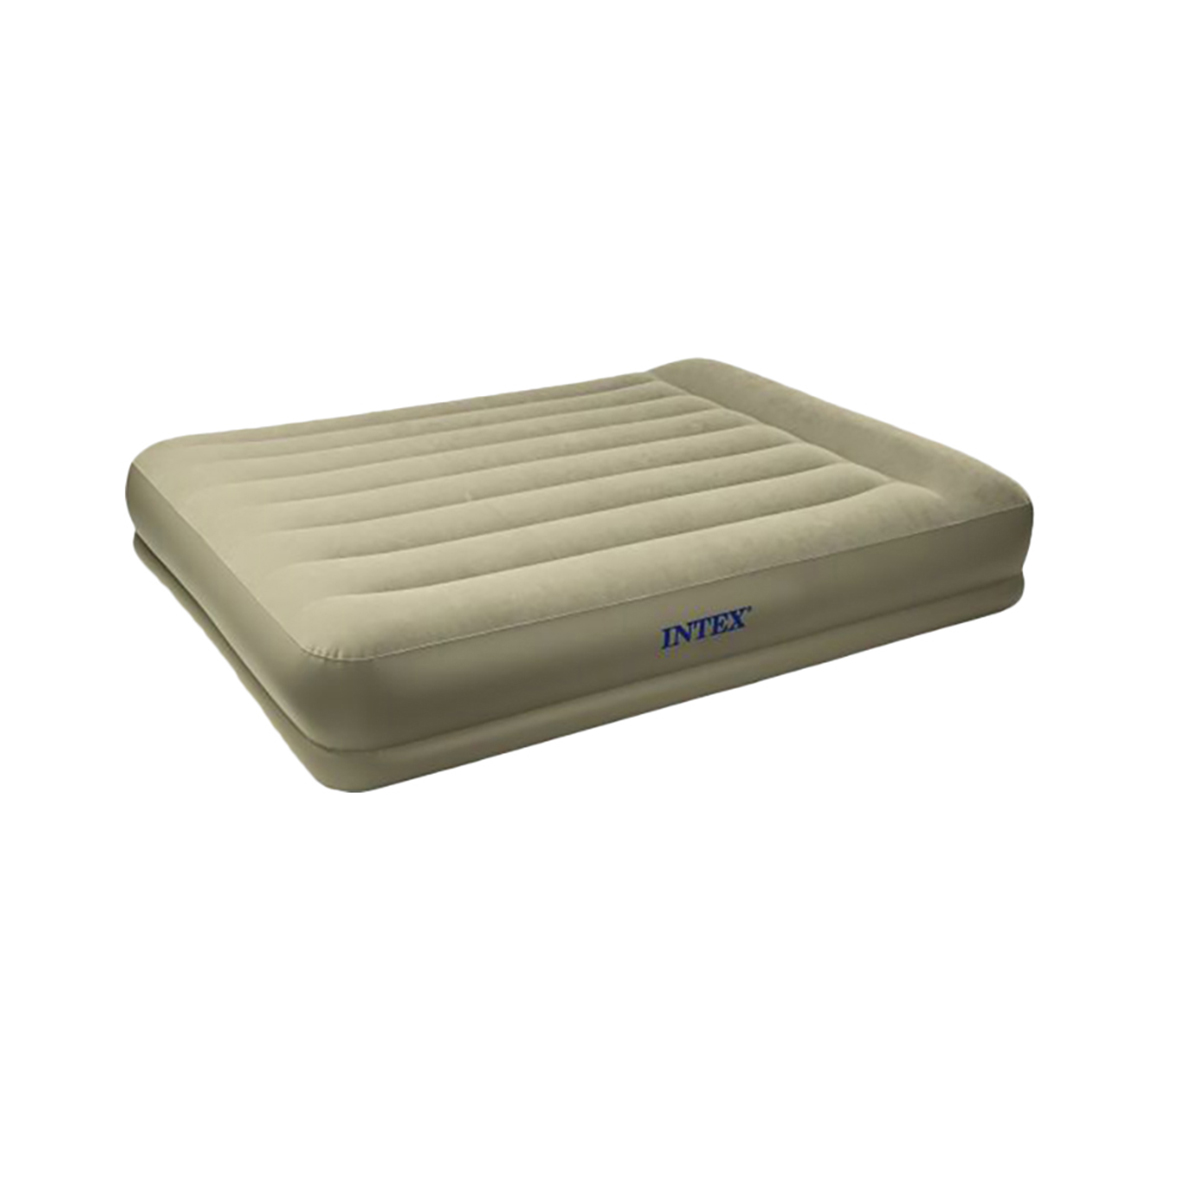 Intex Inflatable Queen Size Pillow Rest Mid-Rise Airbed - Beige